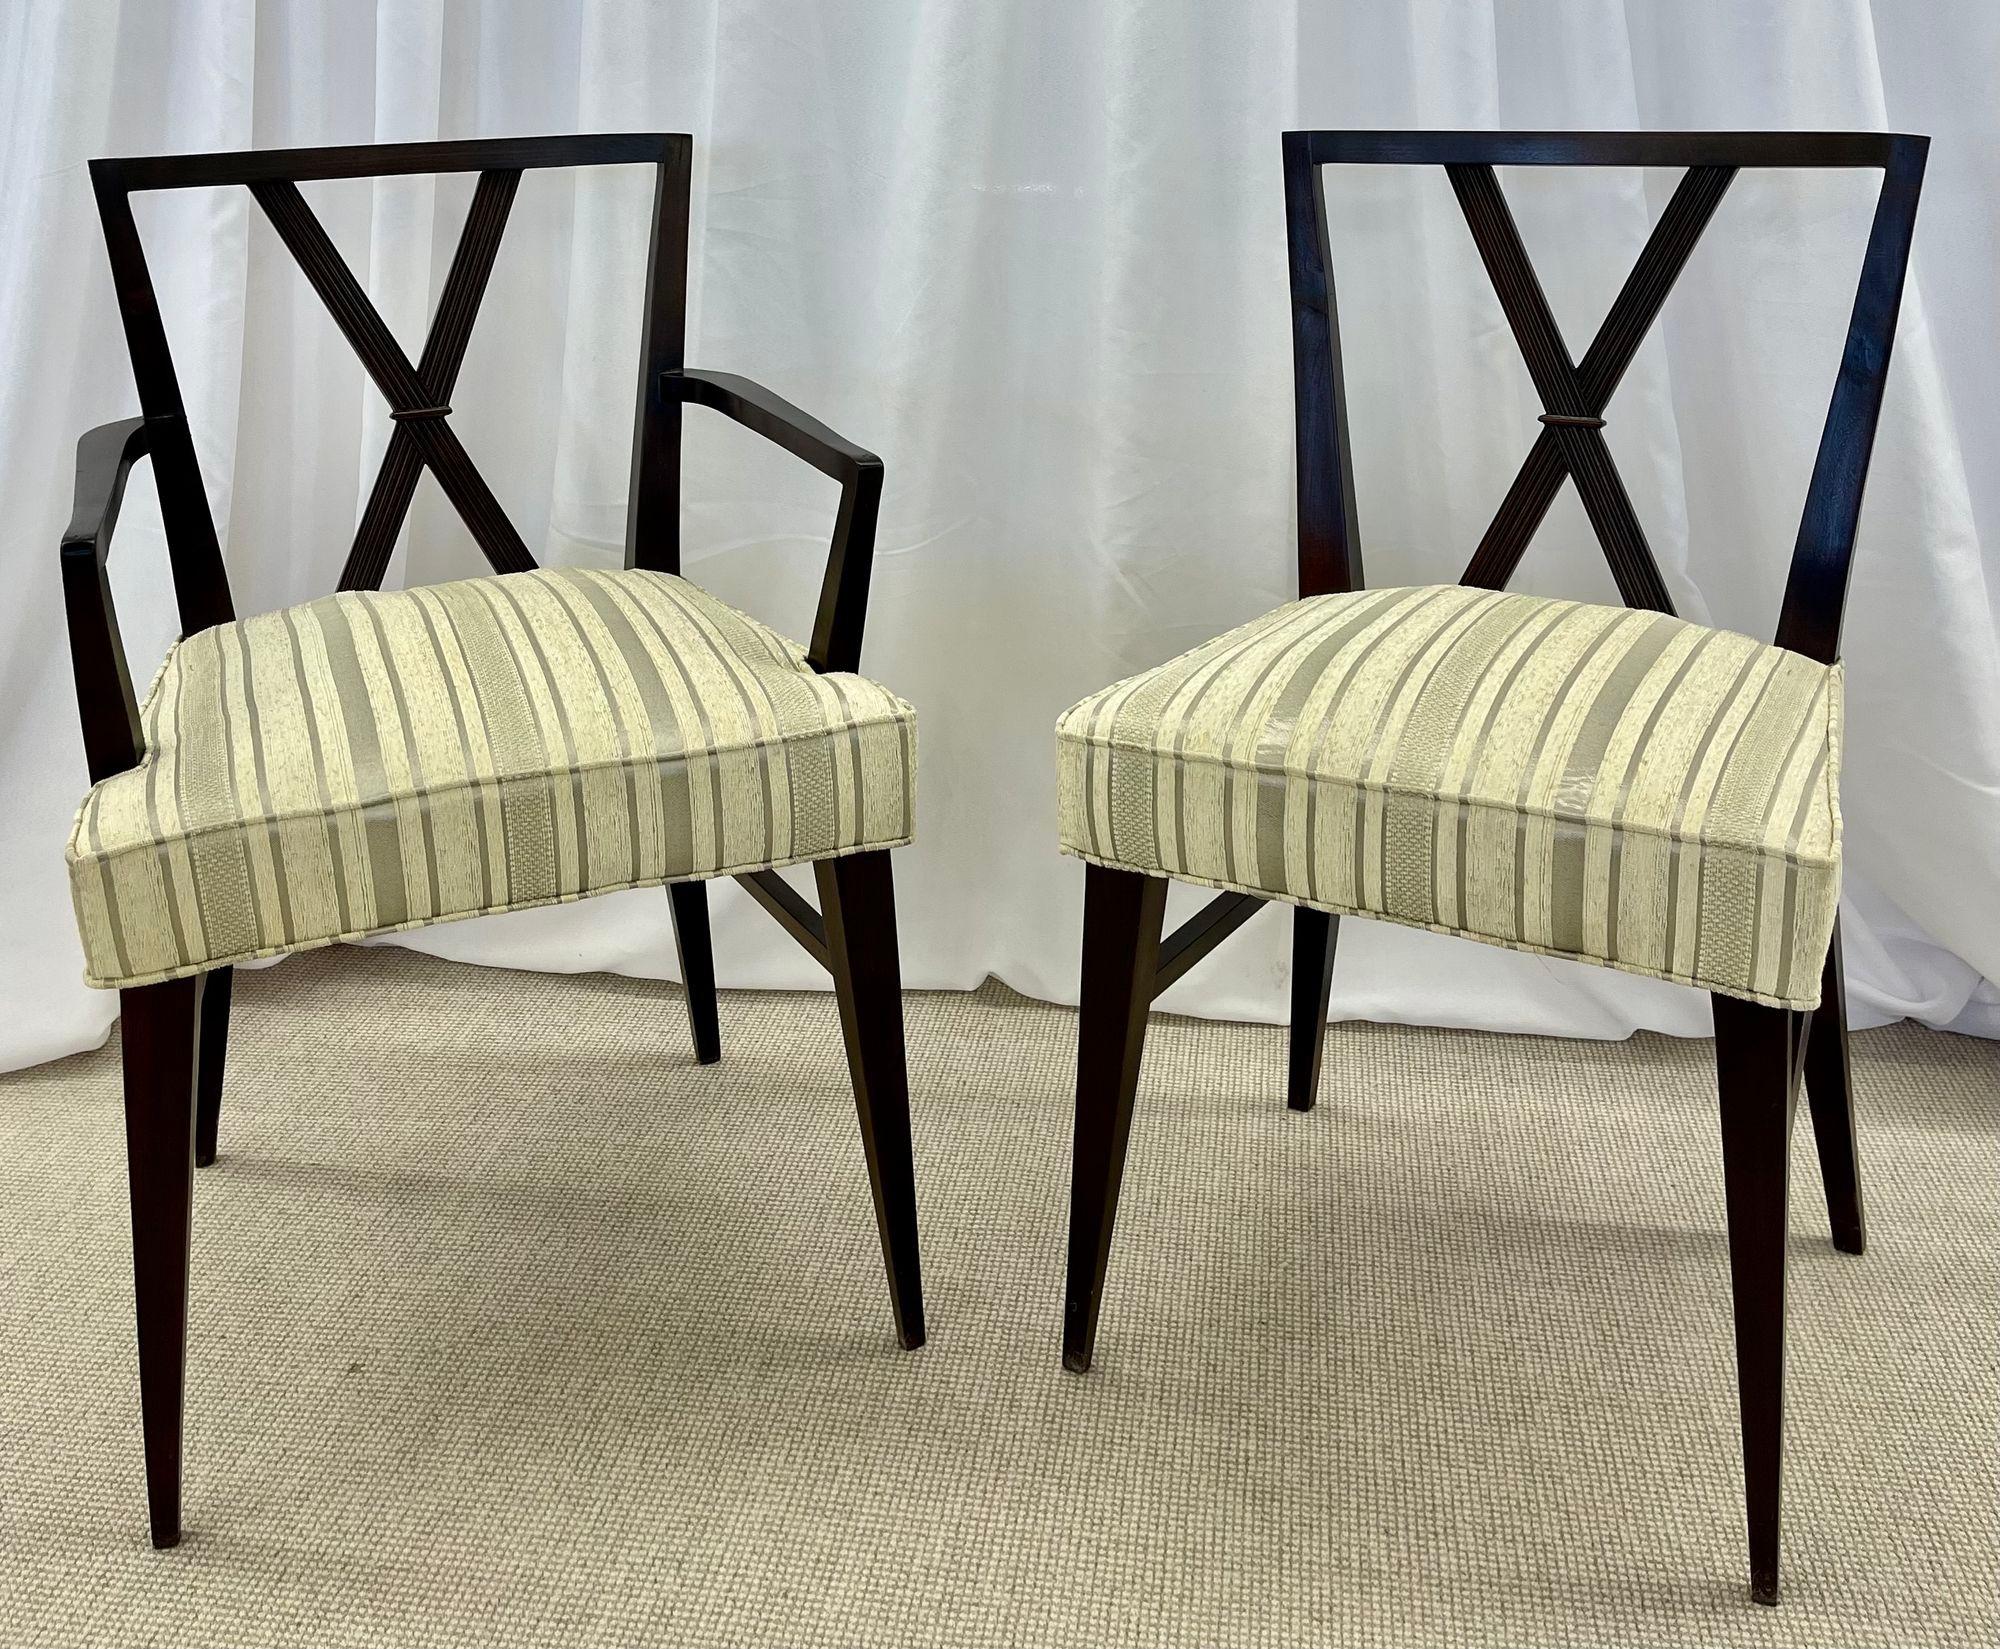 Upholstery Tommi Parzinger Attrib., Mid-Century Modern, Twelve Dining Chairs, 1960s For Sale